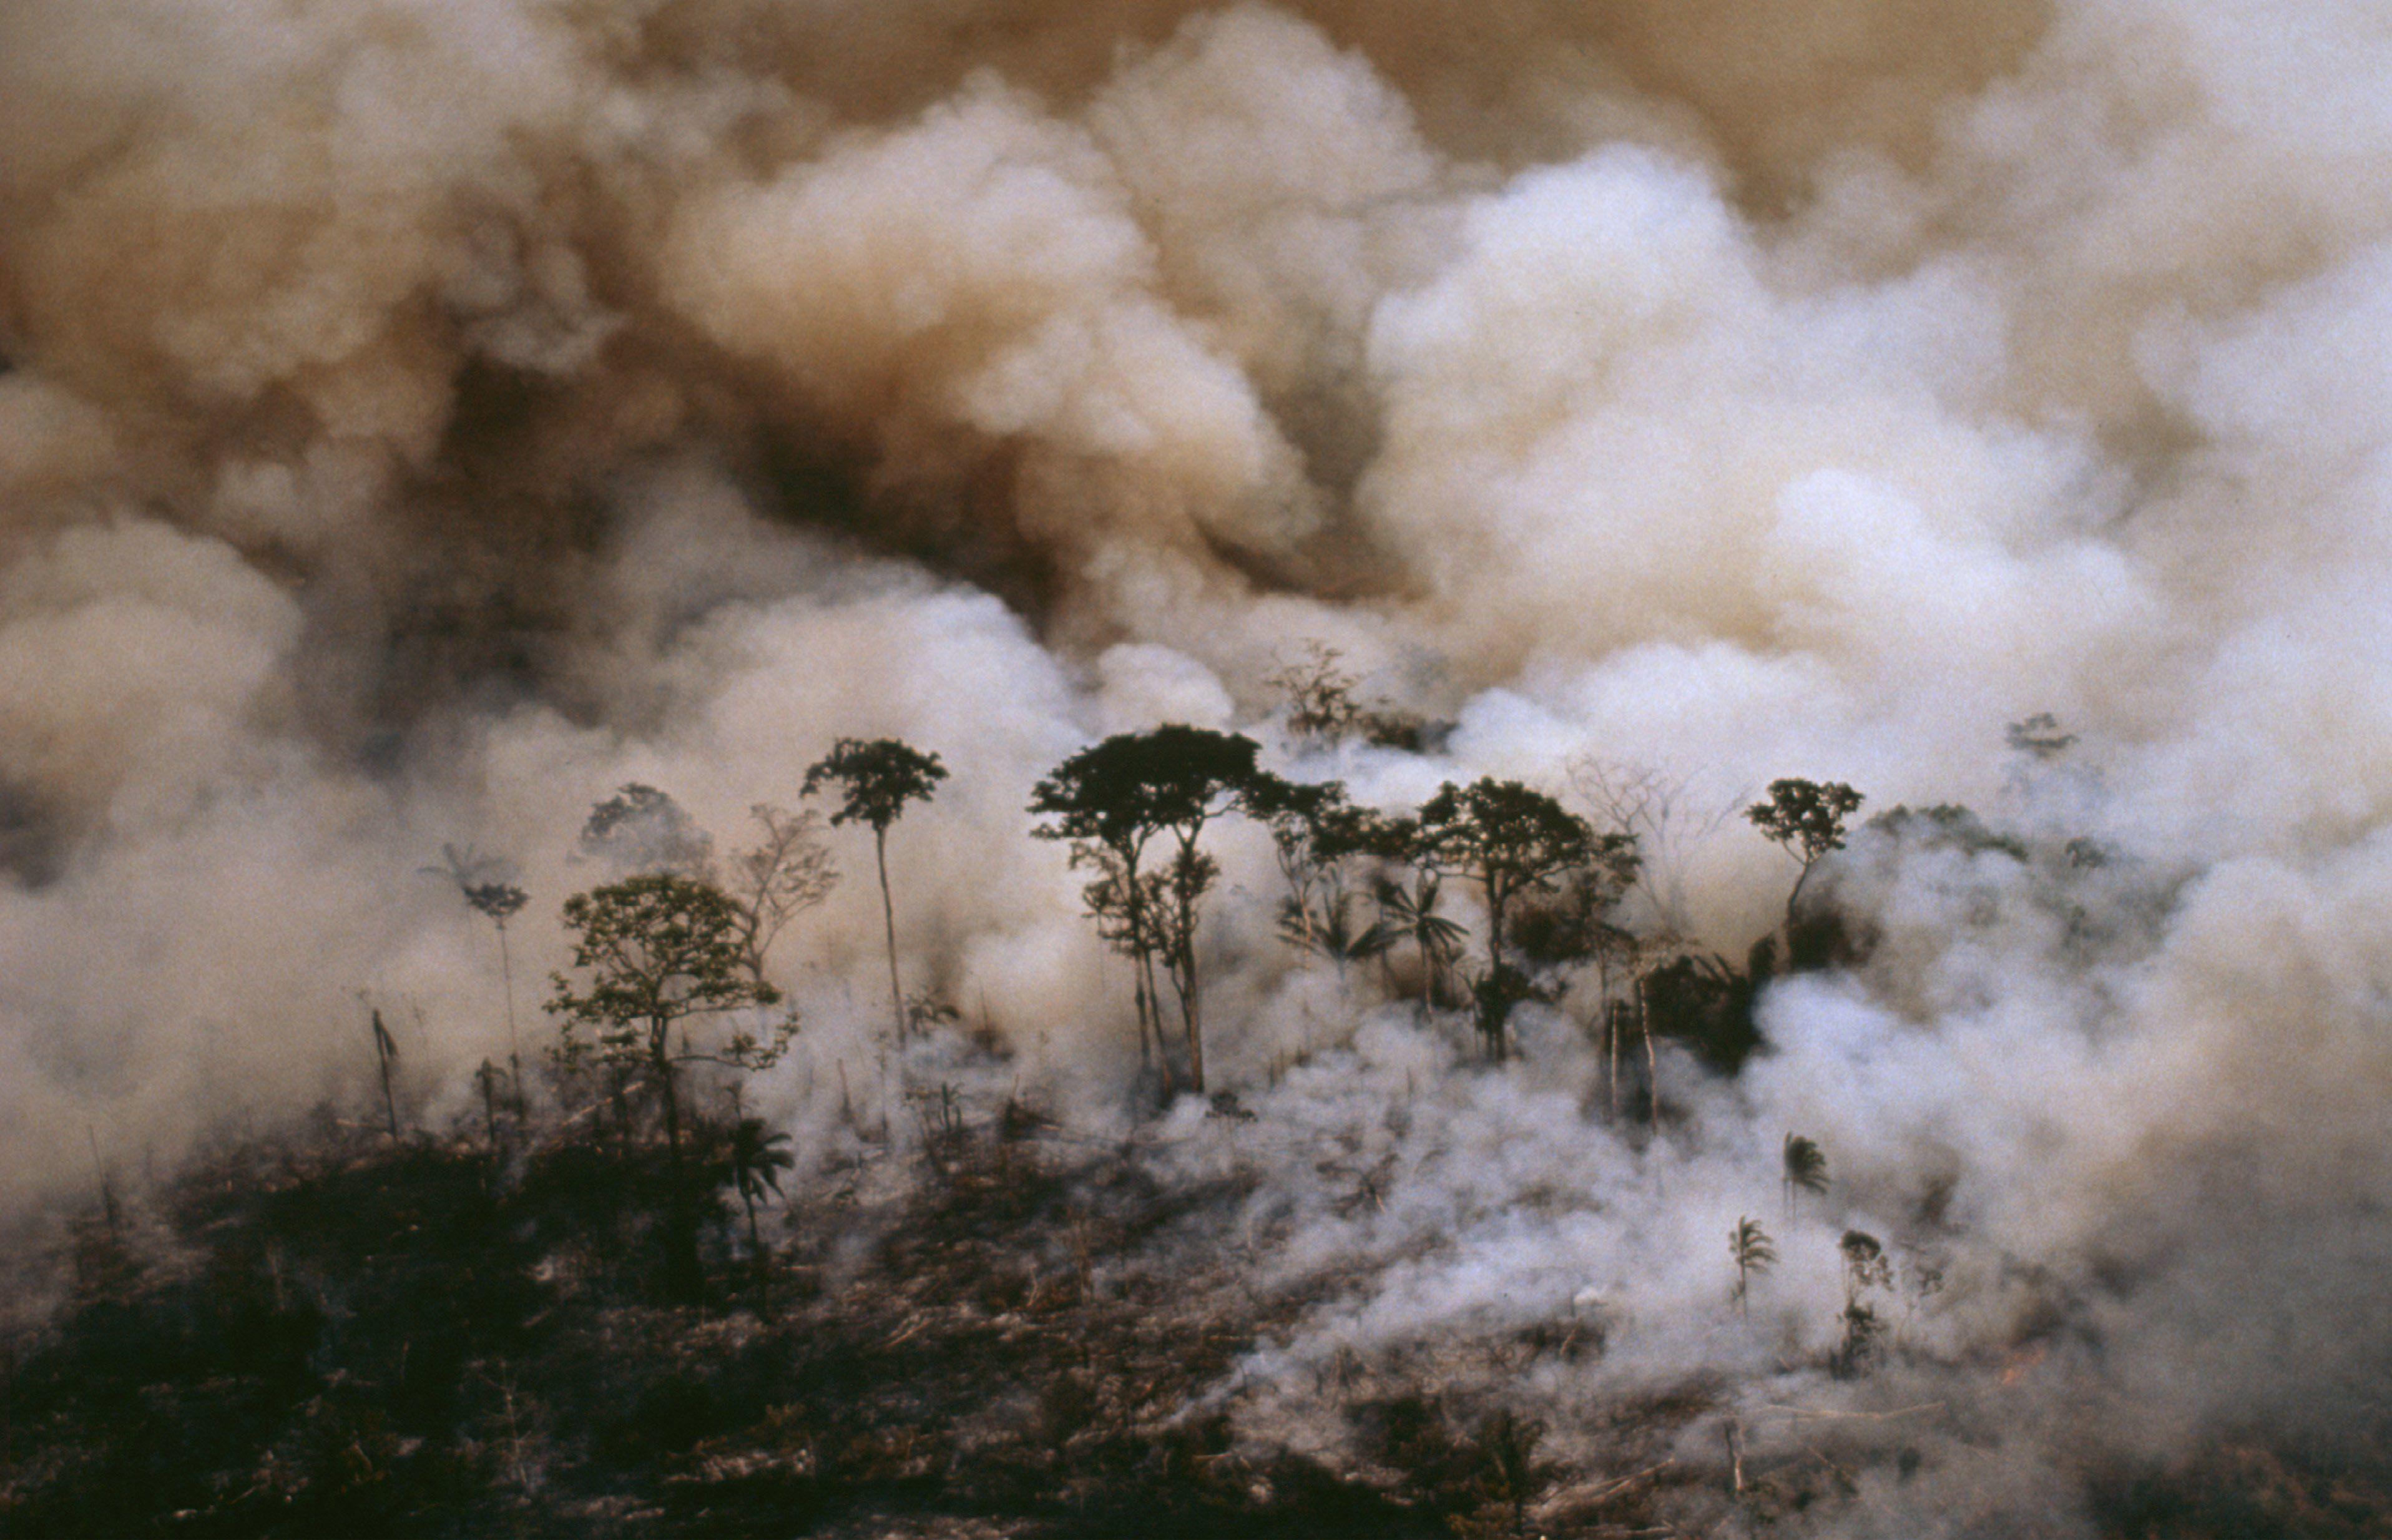 Aerial shot of Acre State showing forest fire. Amazonia, Brazil